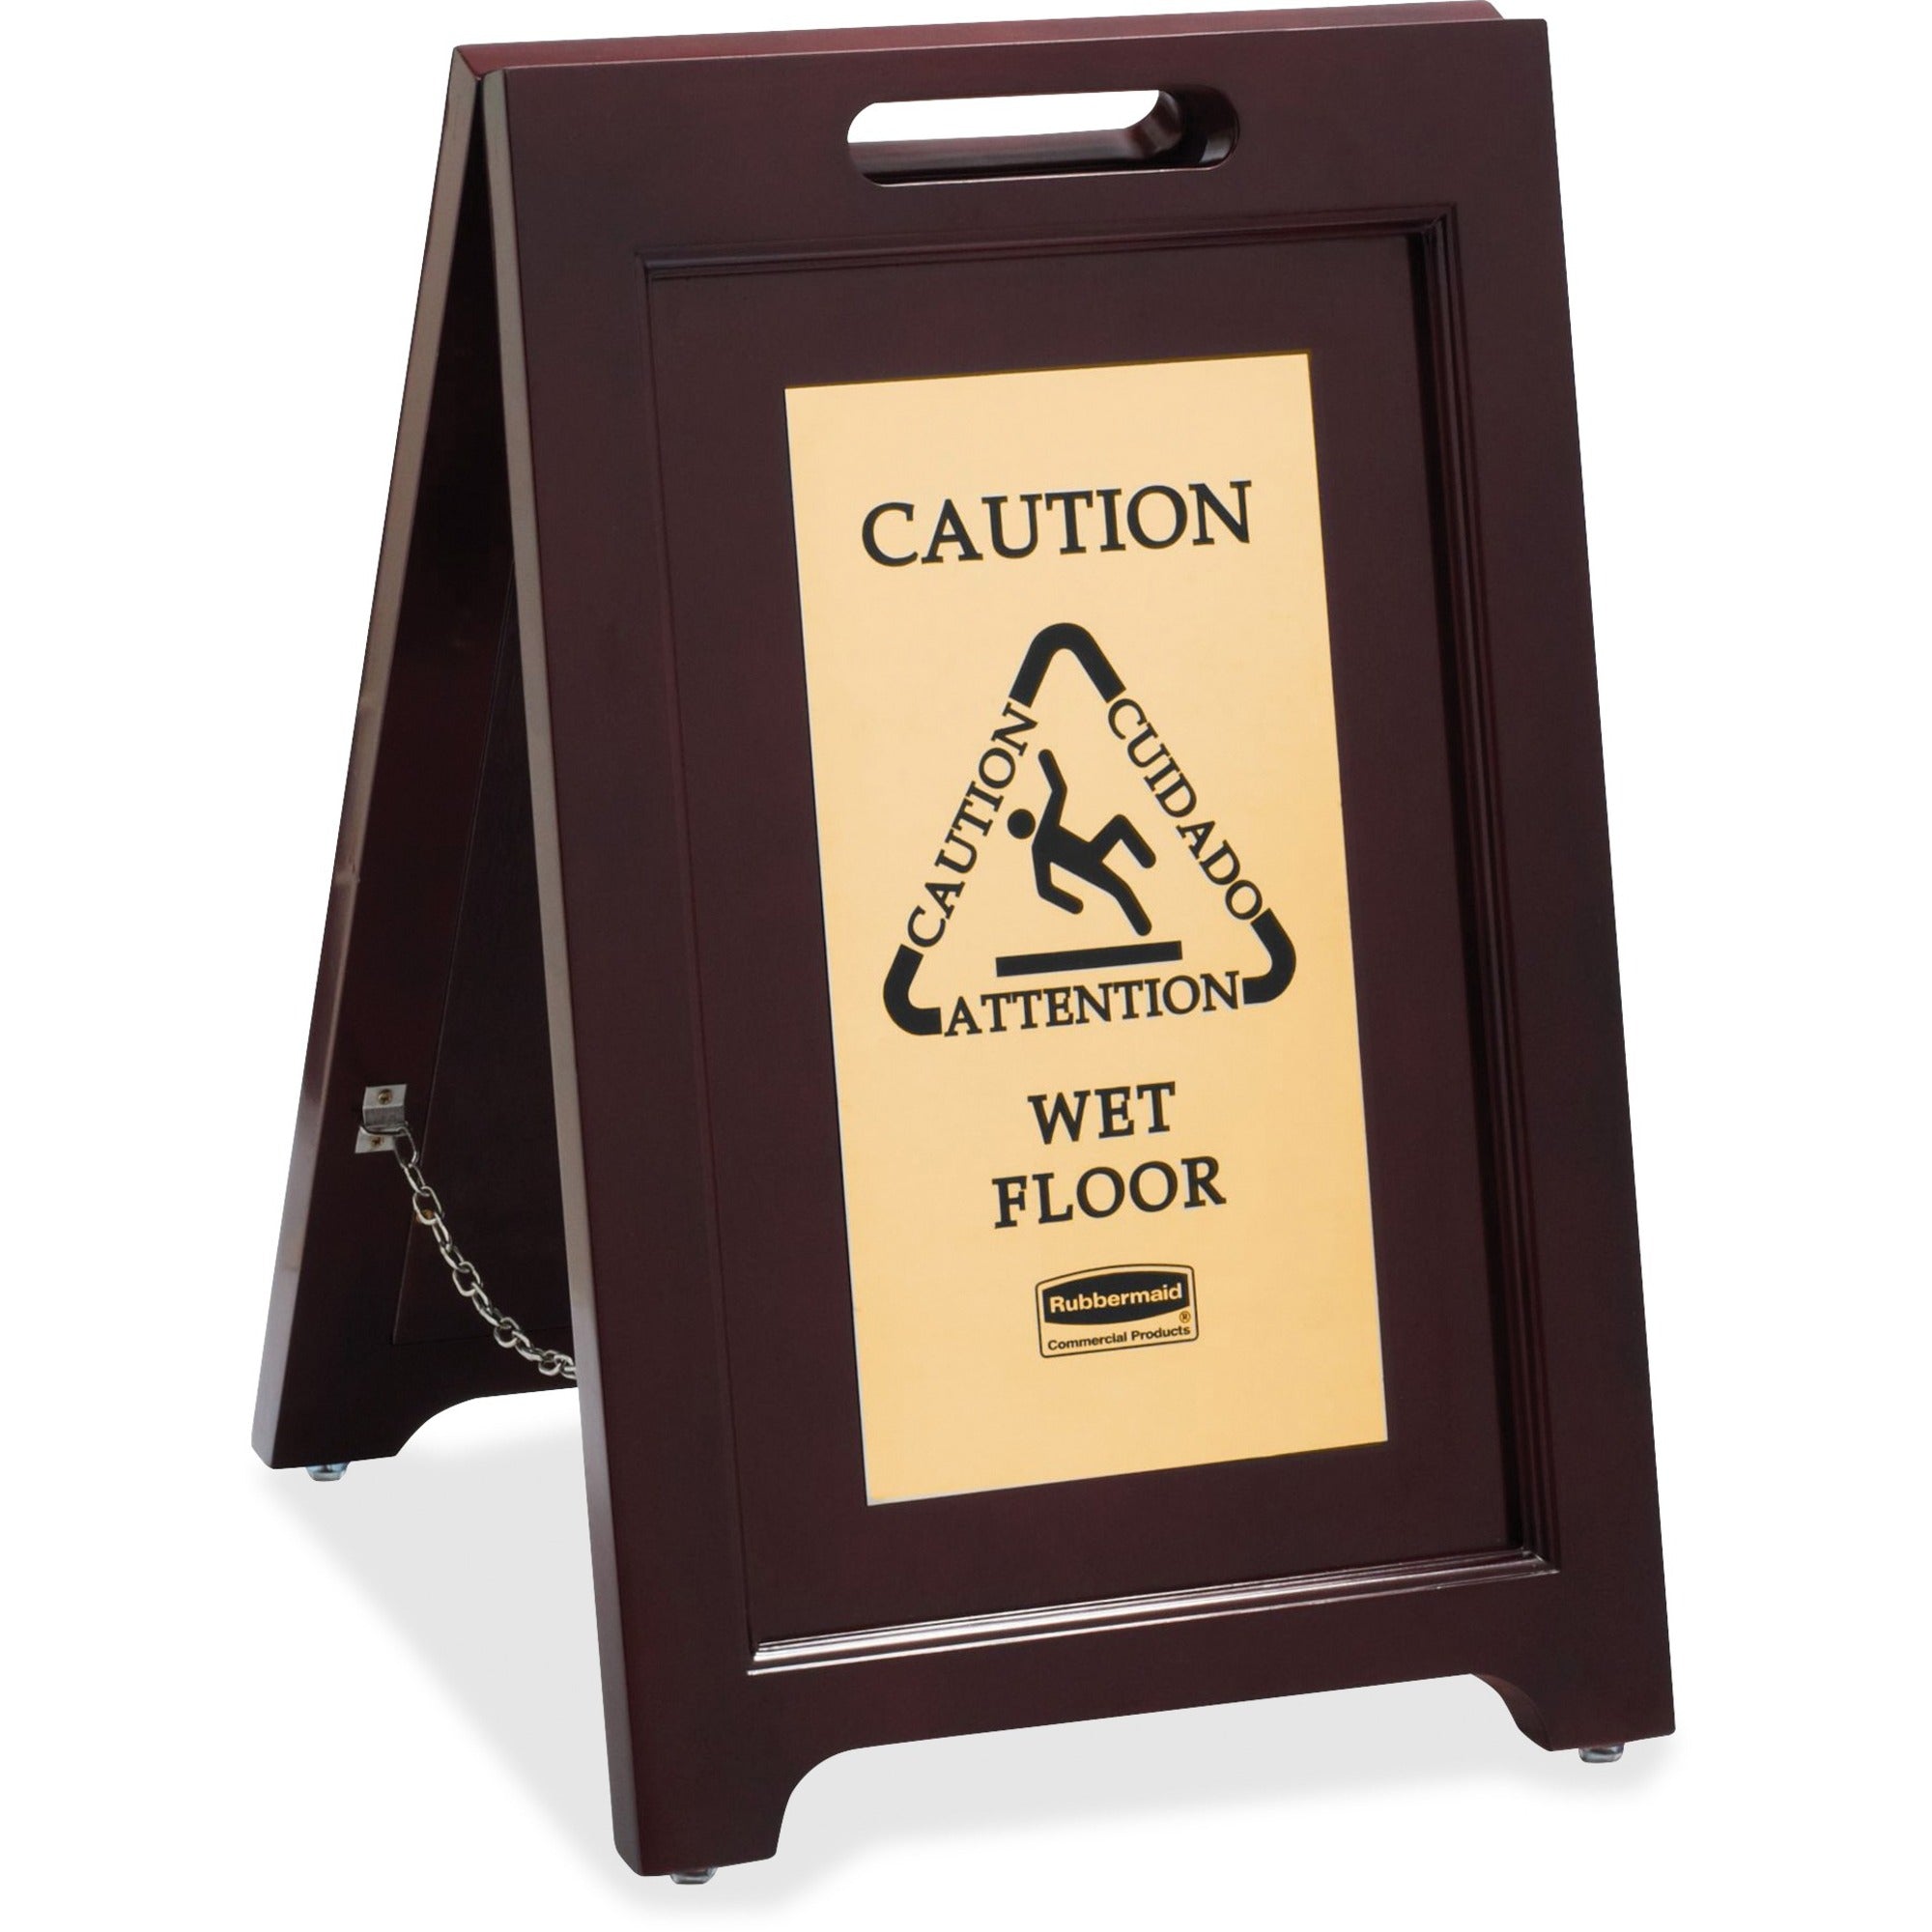 Rubbermaid Commercial Brass Plaque Wooden Caution Sign - 1 Each - Caution, Attention, Cuidado, Wet Floor Print/Message - 15" Width x 23.5" Height x 16.2" Depth - Rectangular Shape - Black Print/Message Color - Double Sided - Durable, Carry Handle, Mu - 